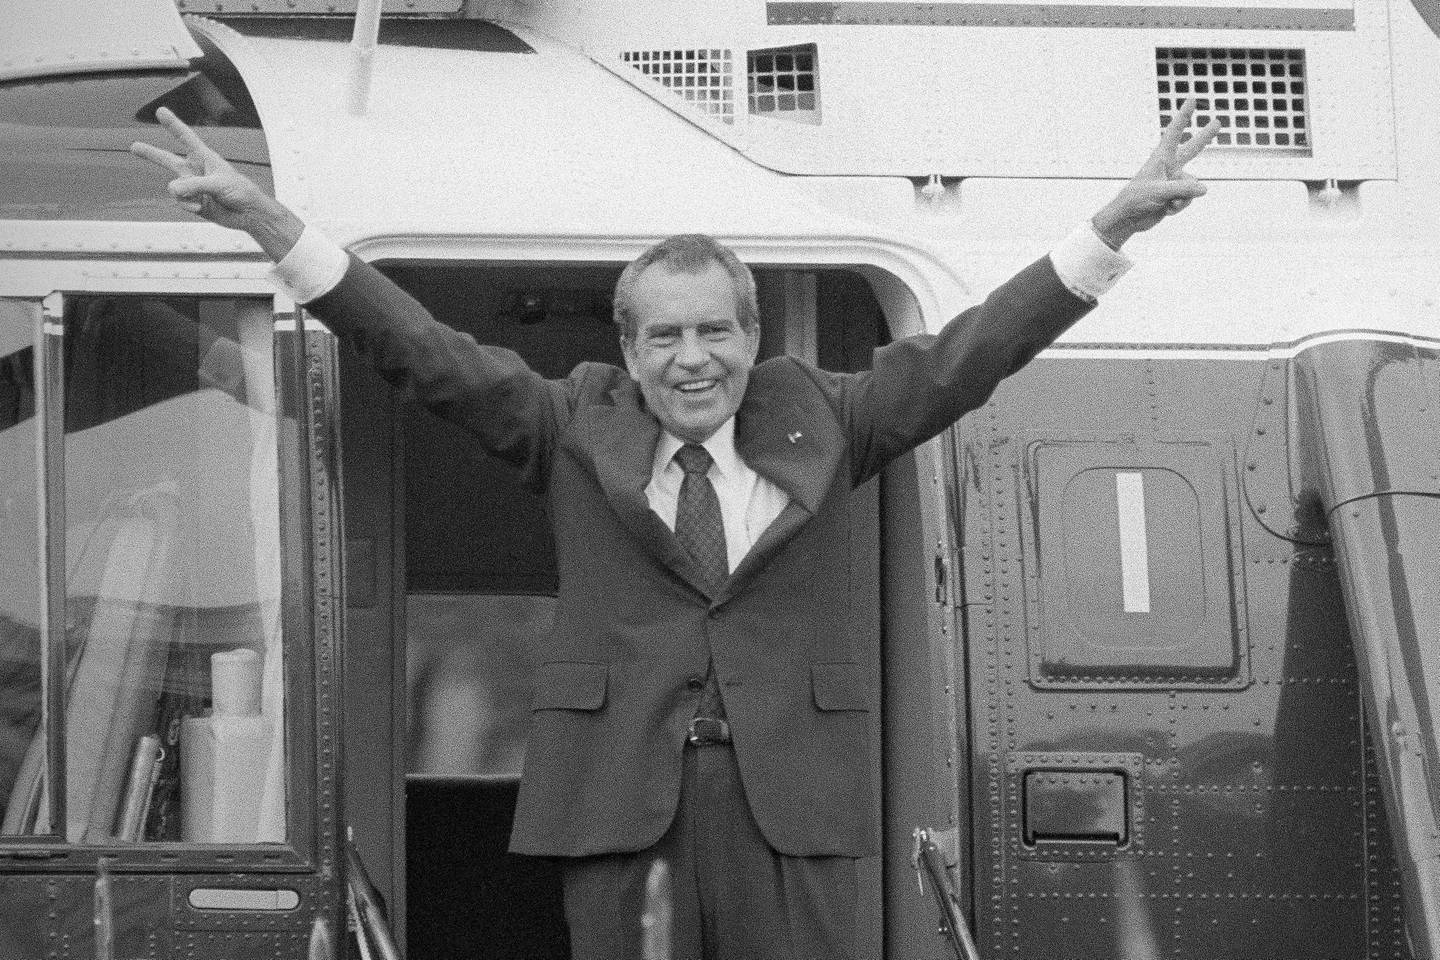 Richard Nixon says goodbye to the White House staff as he boards a helicopter after resigning as US President, August 9, 1974. AP